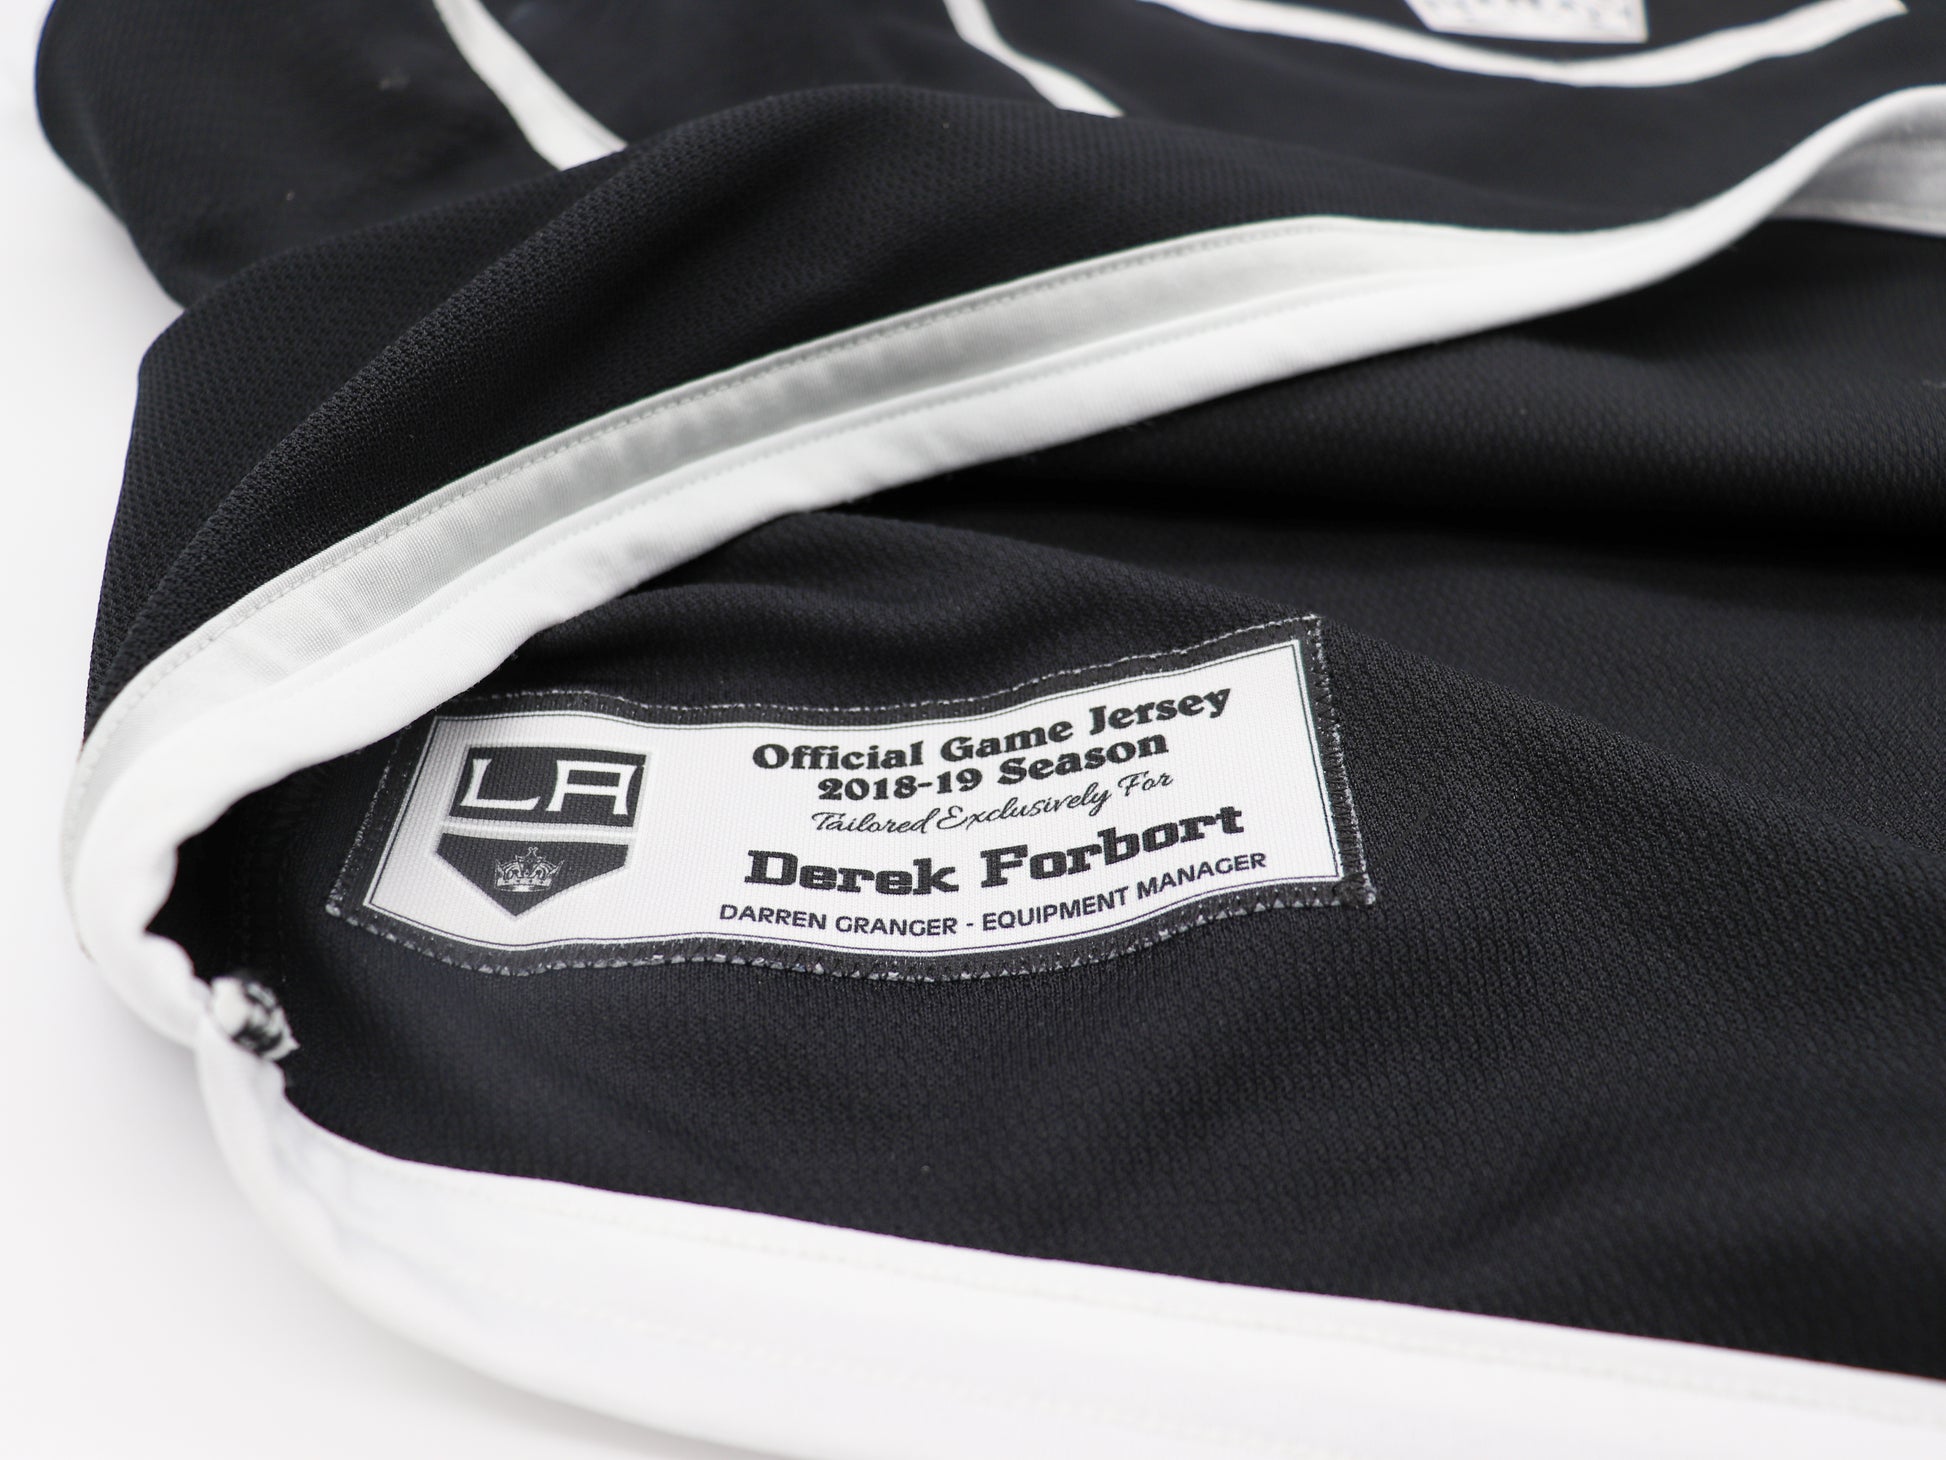 to Die for Collectibles 2018-19 Game Worn Los Angeles Kings #24 Derek Forbort Black Home Jersey, Adidas Size 60